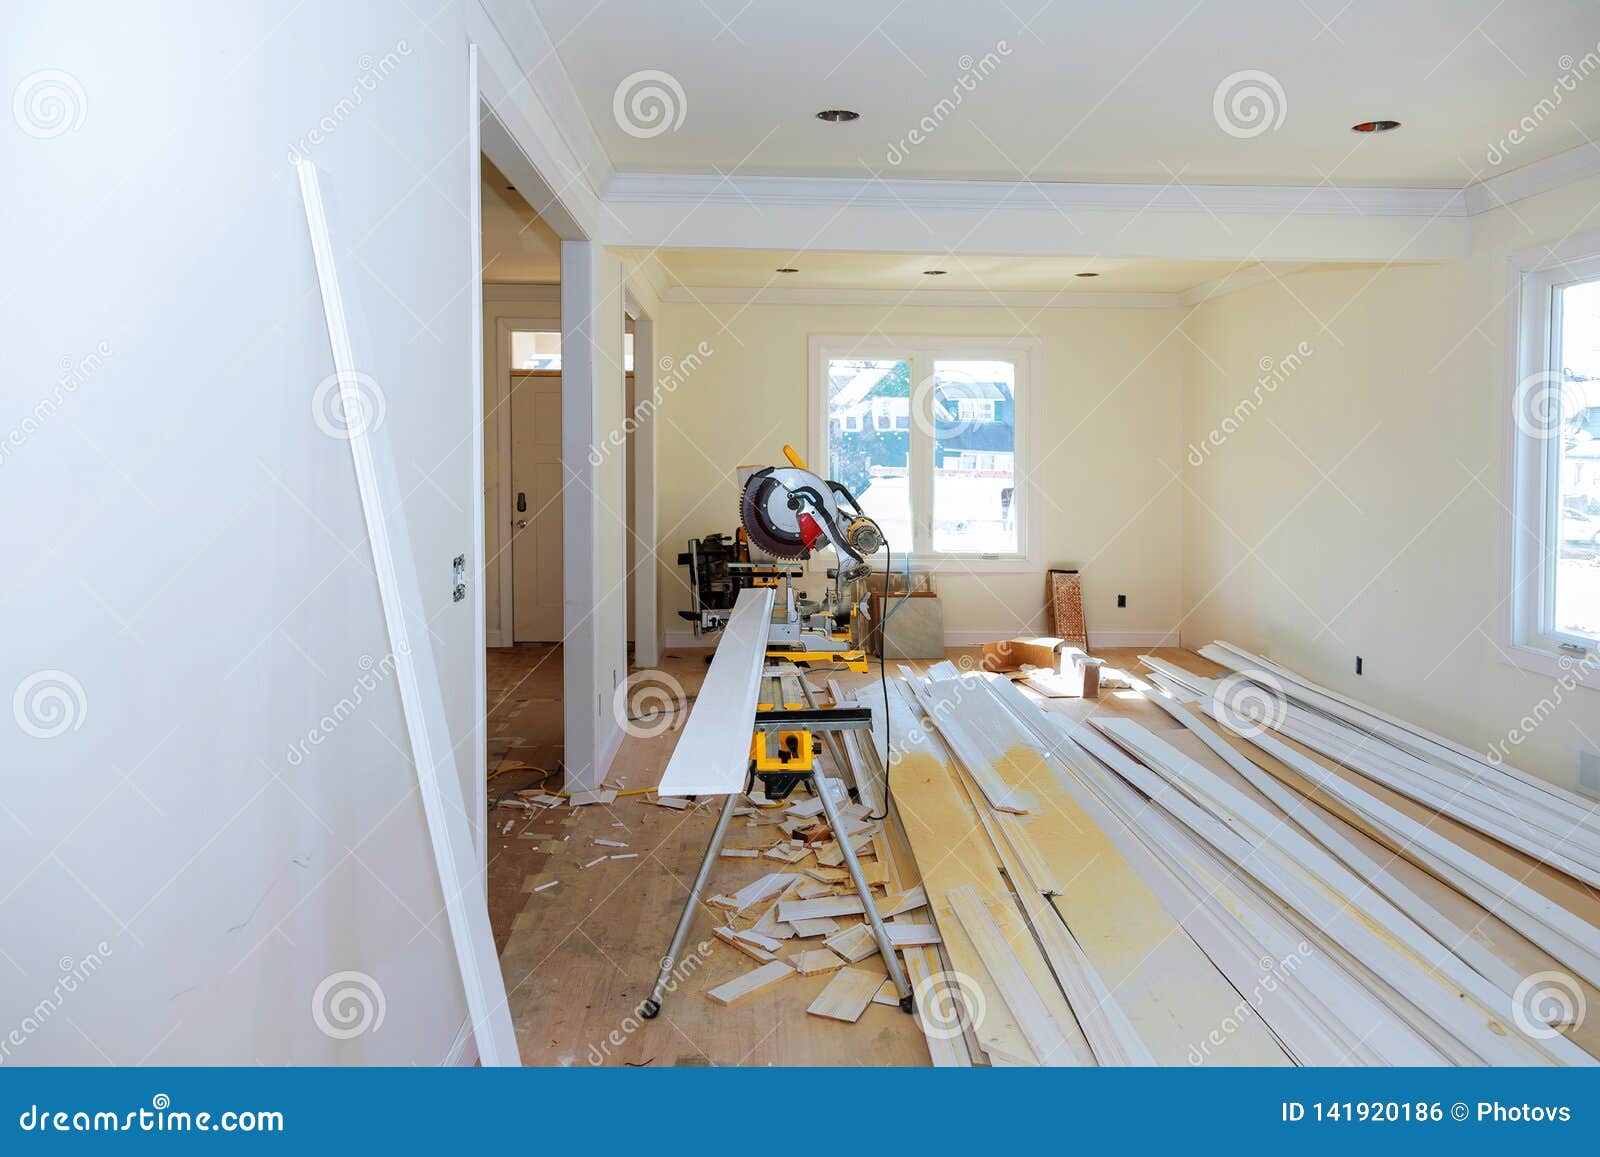 Interior Construction Of Housing Project With Door And